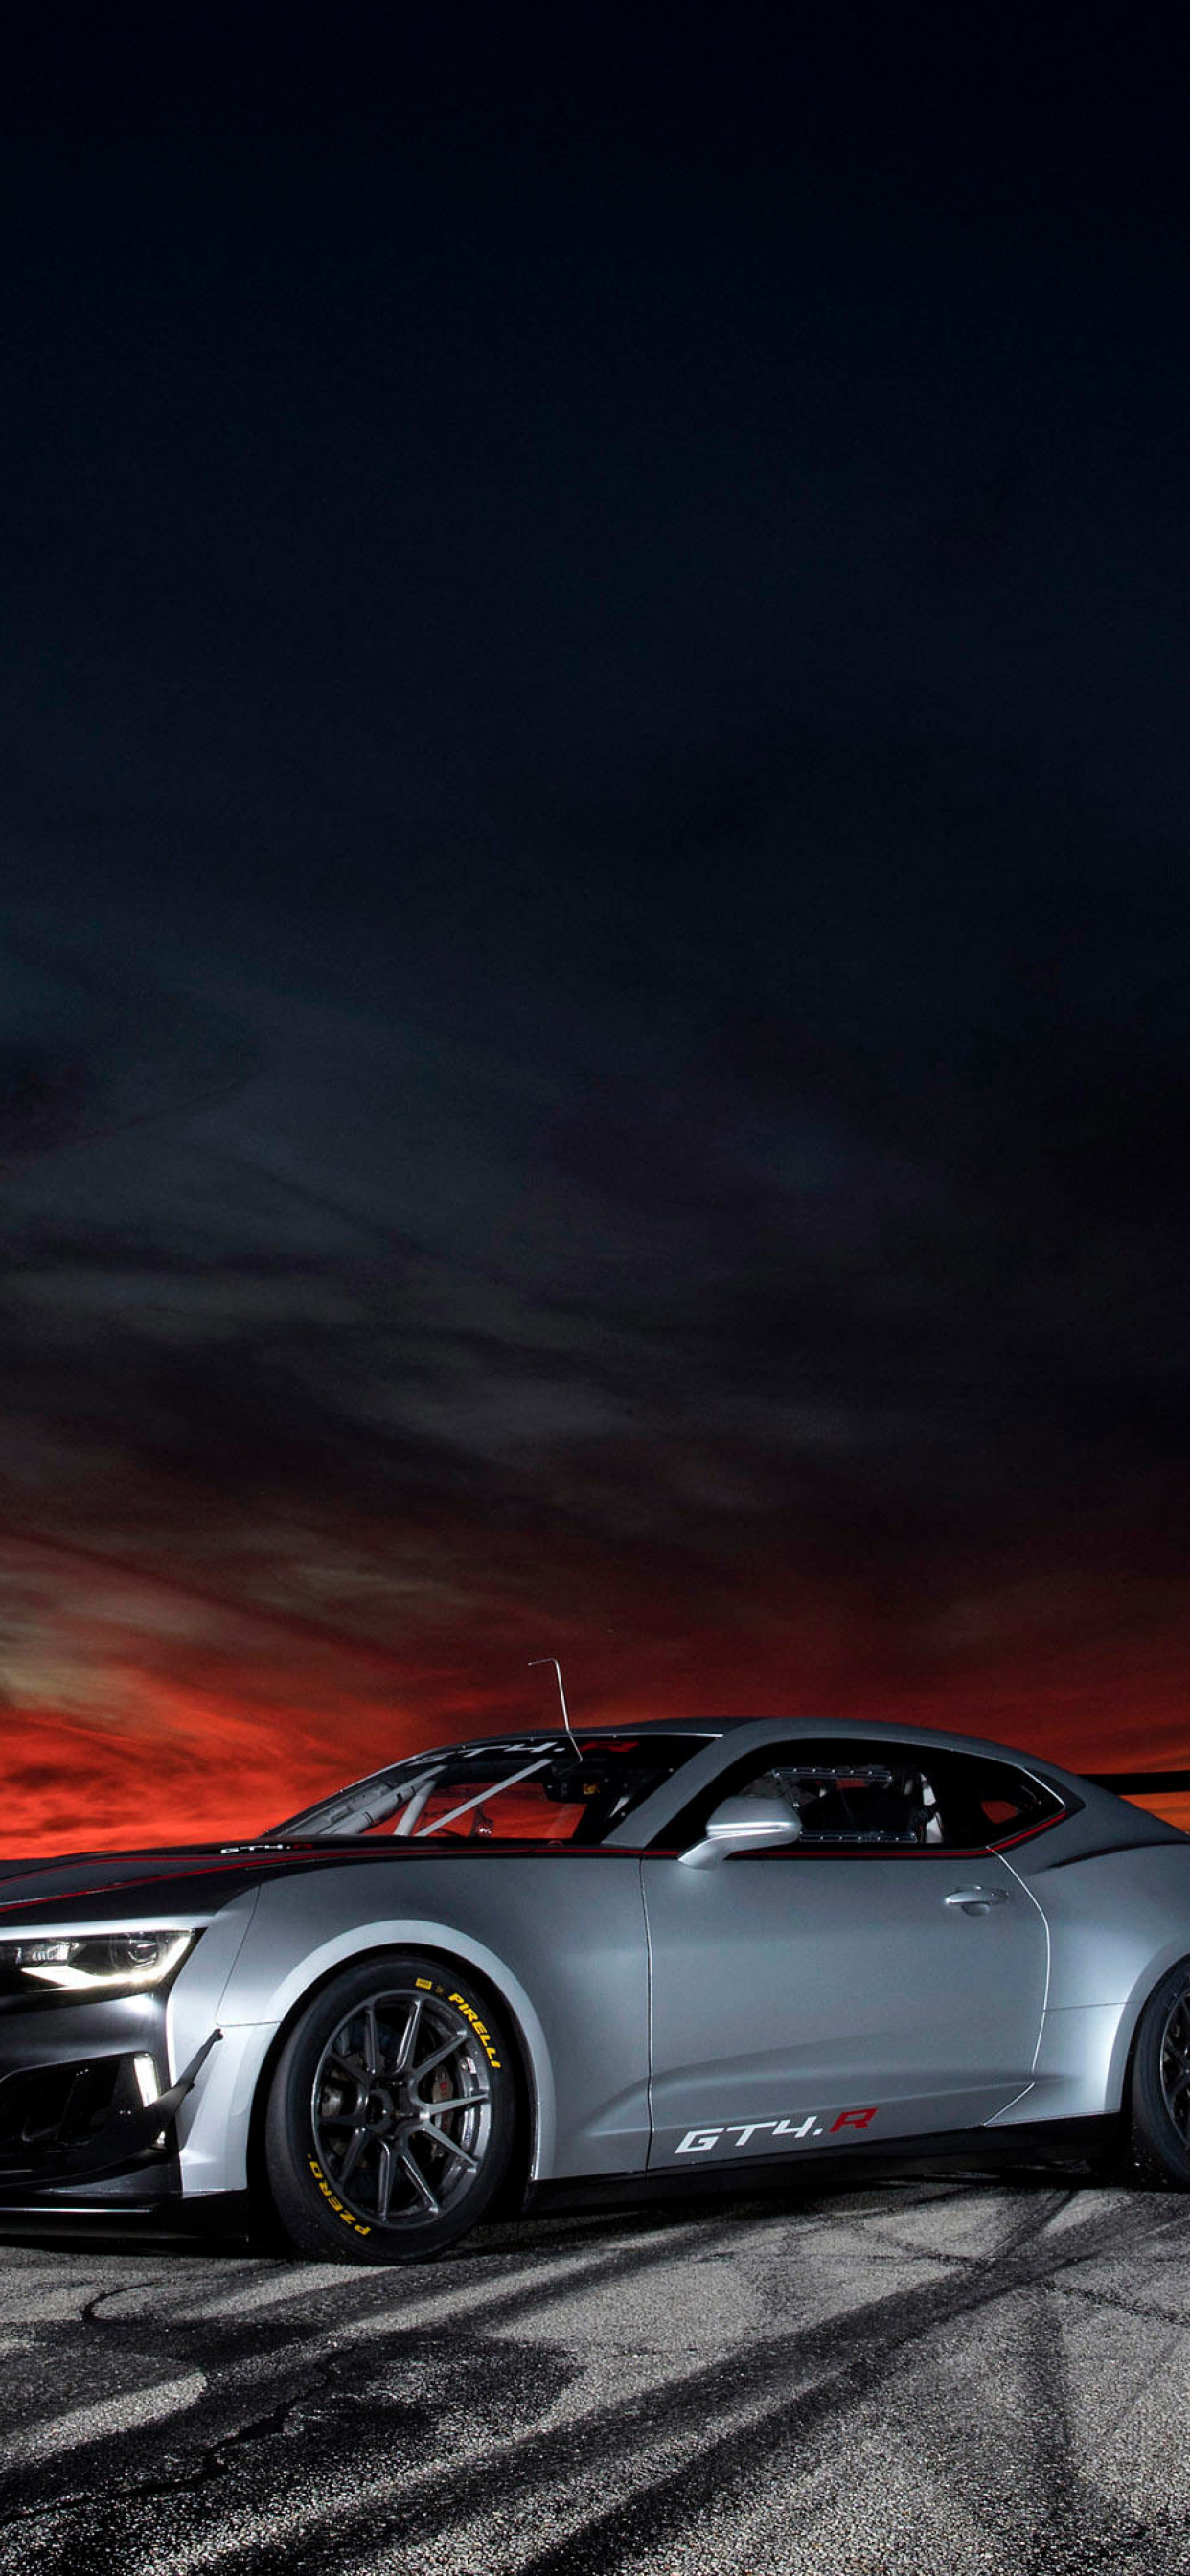 Download wallpaper 750x1334 1969 chevy camaro gcode muscle car iphone 7  iphone 8 750x1334 hd background 21490